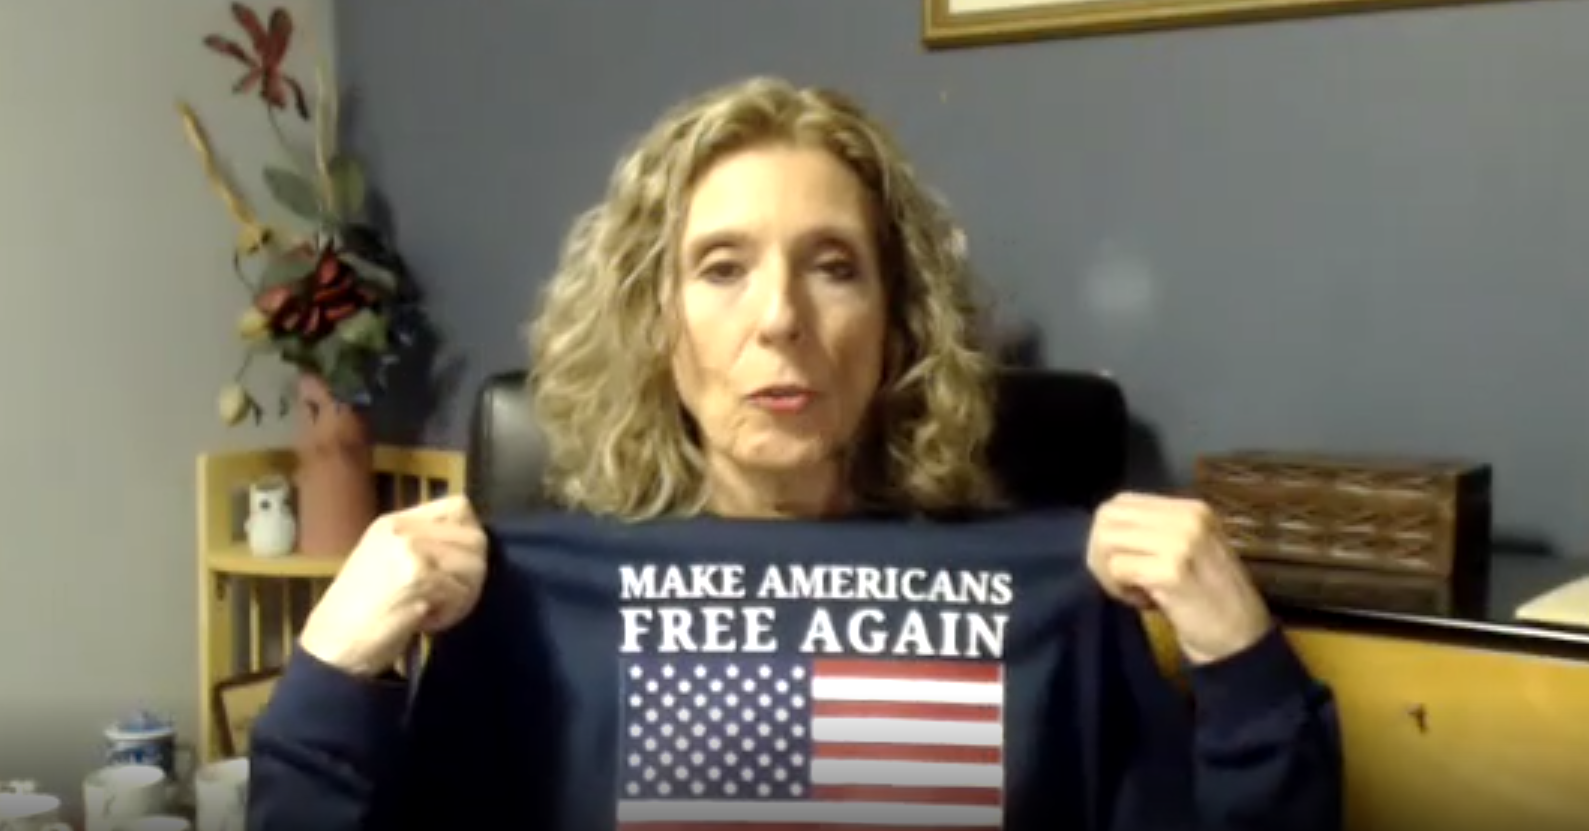 MyPatriotsNetwork-The Plan To Make Americans Free Again & Much More! April 13, 2021 Update